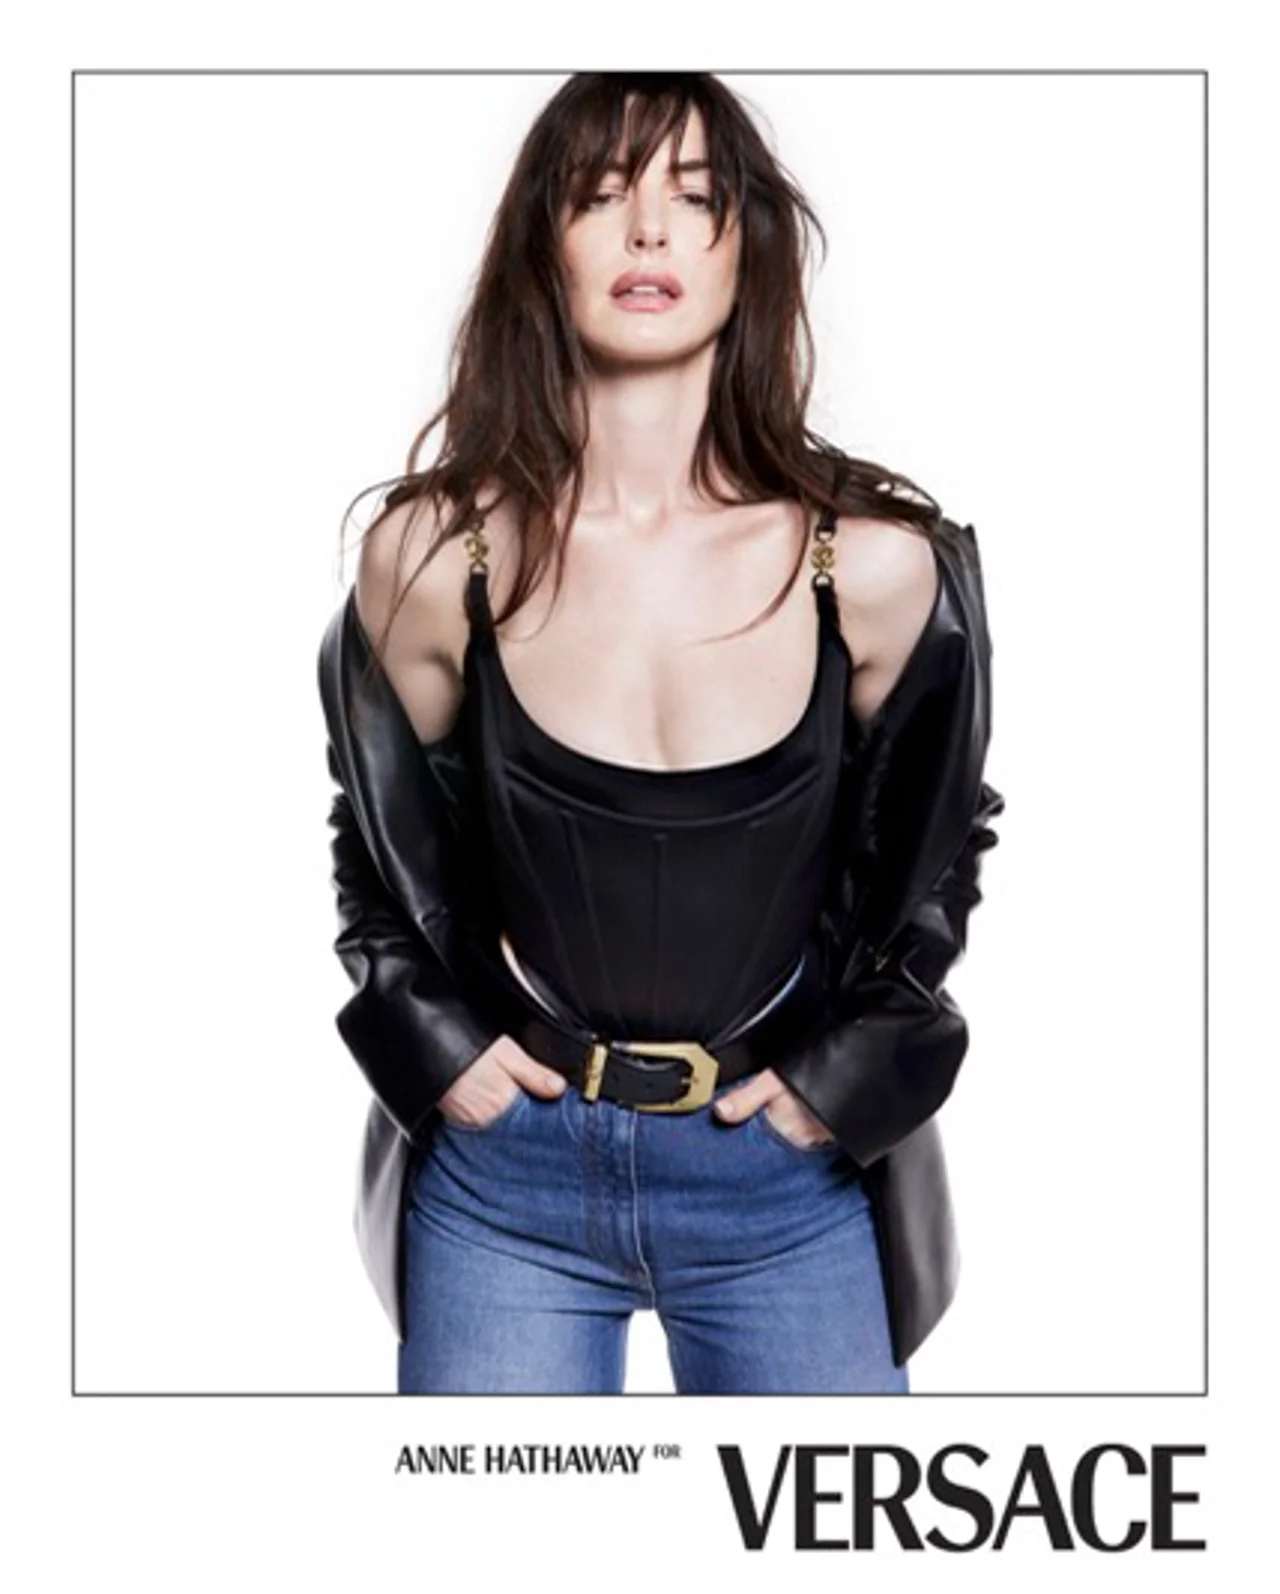 Versace Icons with Anne Hathaway | Campaign | Versace